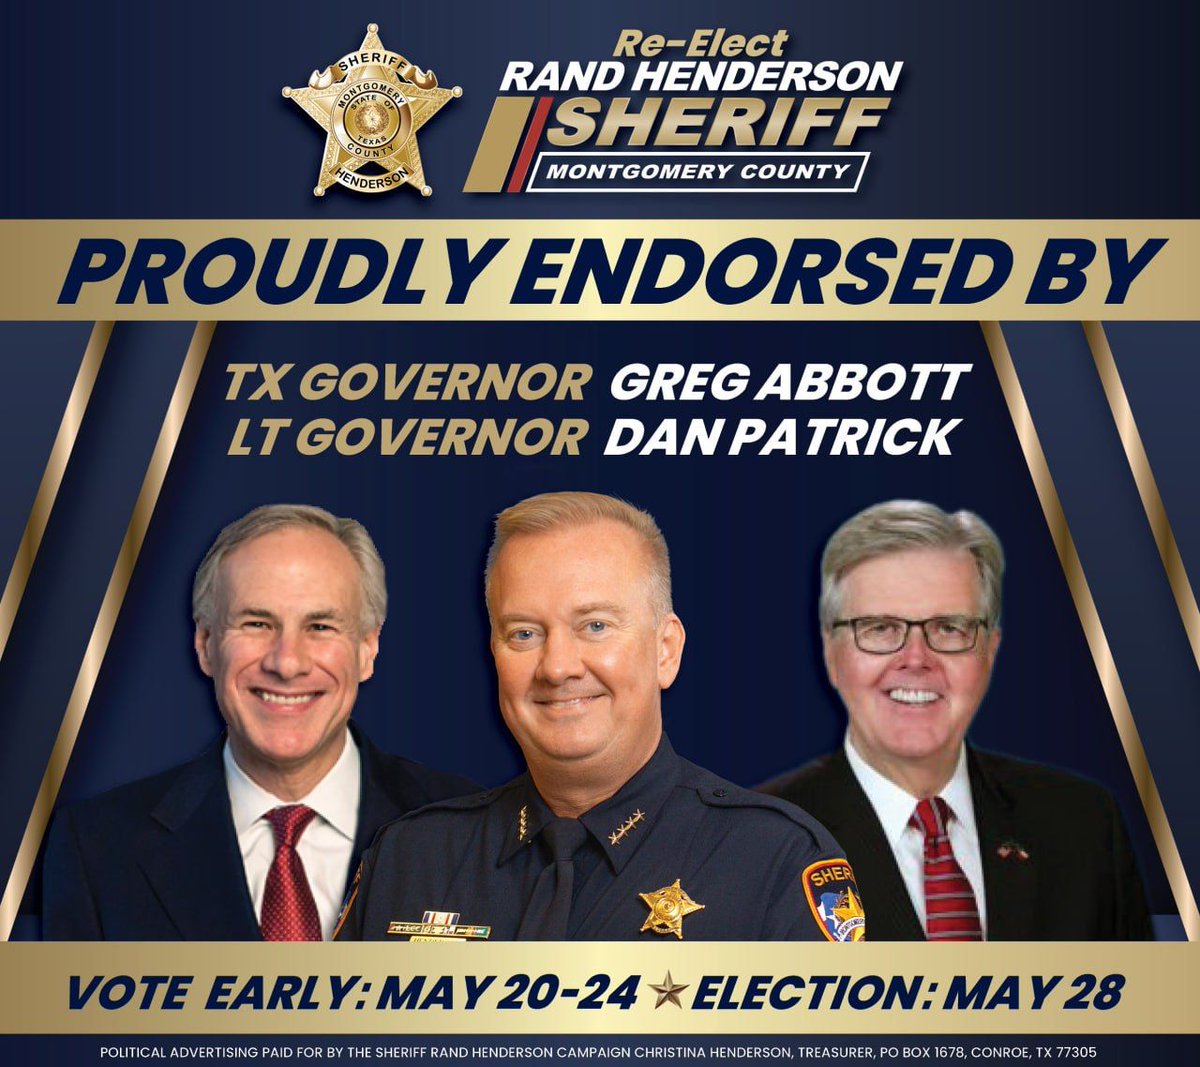 I have worked with Governor @GregAbbott_TX and Lt Governor @DanPatrick on issues impacting Montgomery County and Texas. With your support and vote we will continue to work as force multipliers to keep Montgomery County. Early Voting: May 20 - May 24 Election Day: May 28